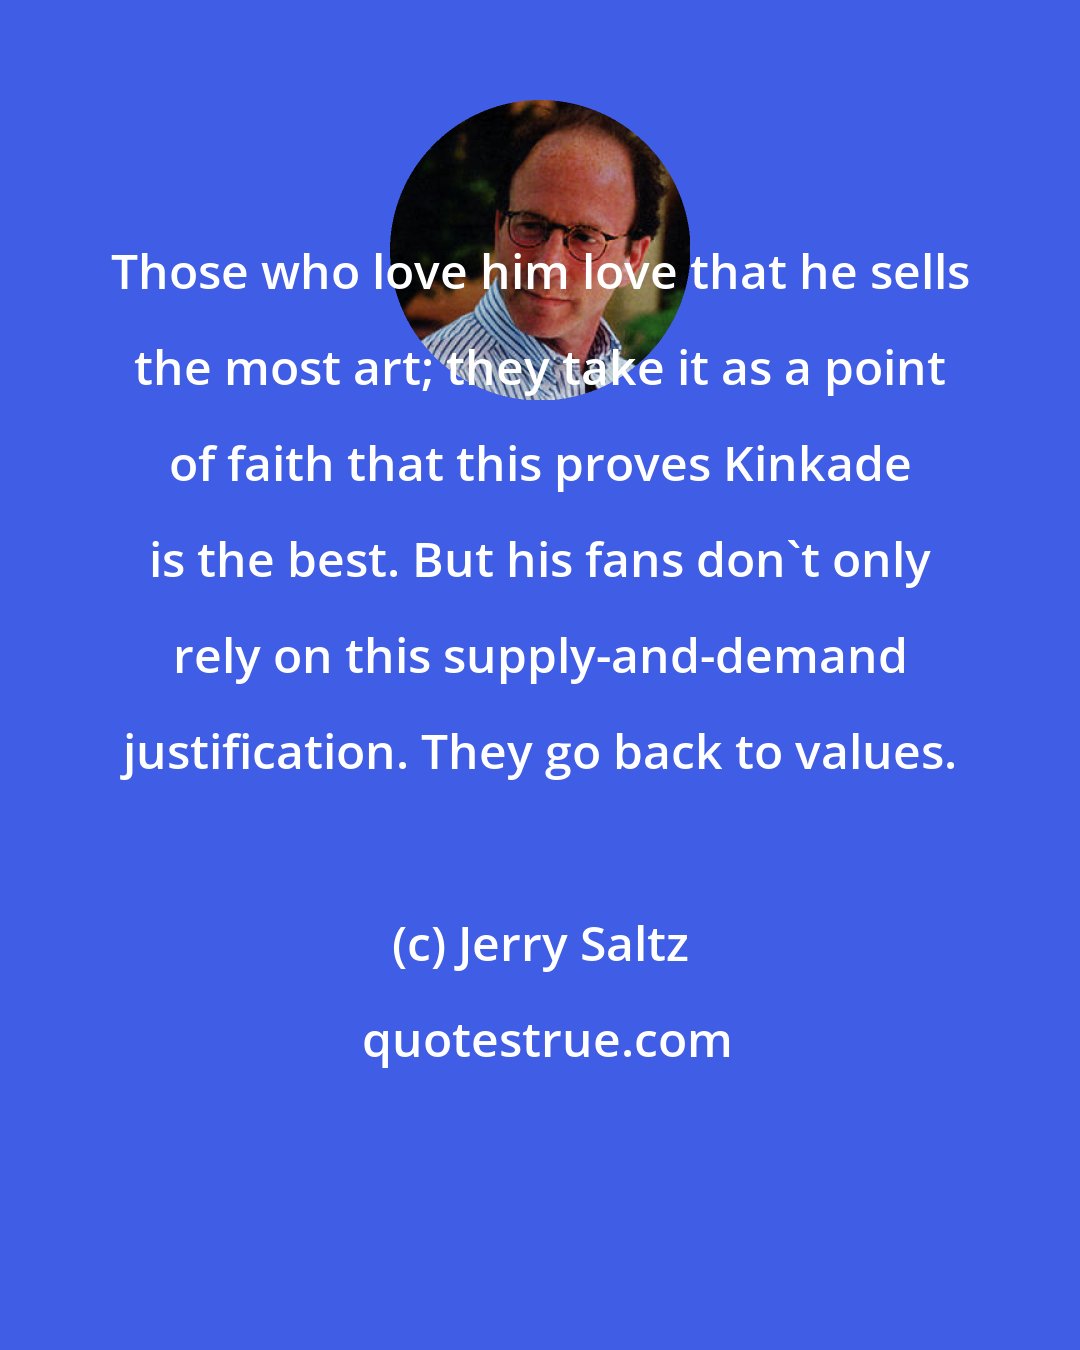 Jerry Saltz: Those who love him love that he sells the most art; they take it as a point of faith that this proves Kinkade is the best. But his fans don't only rely on this supply-and-demand justification. They go back to values.